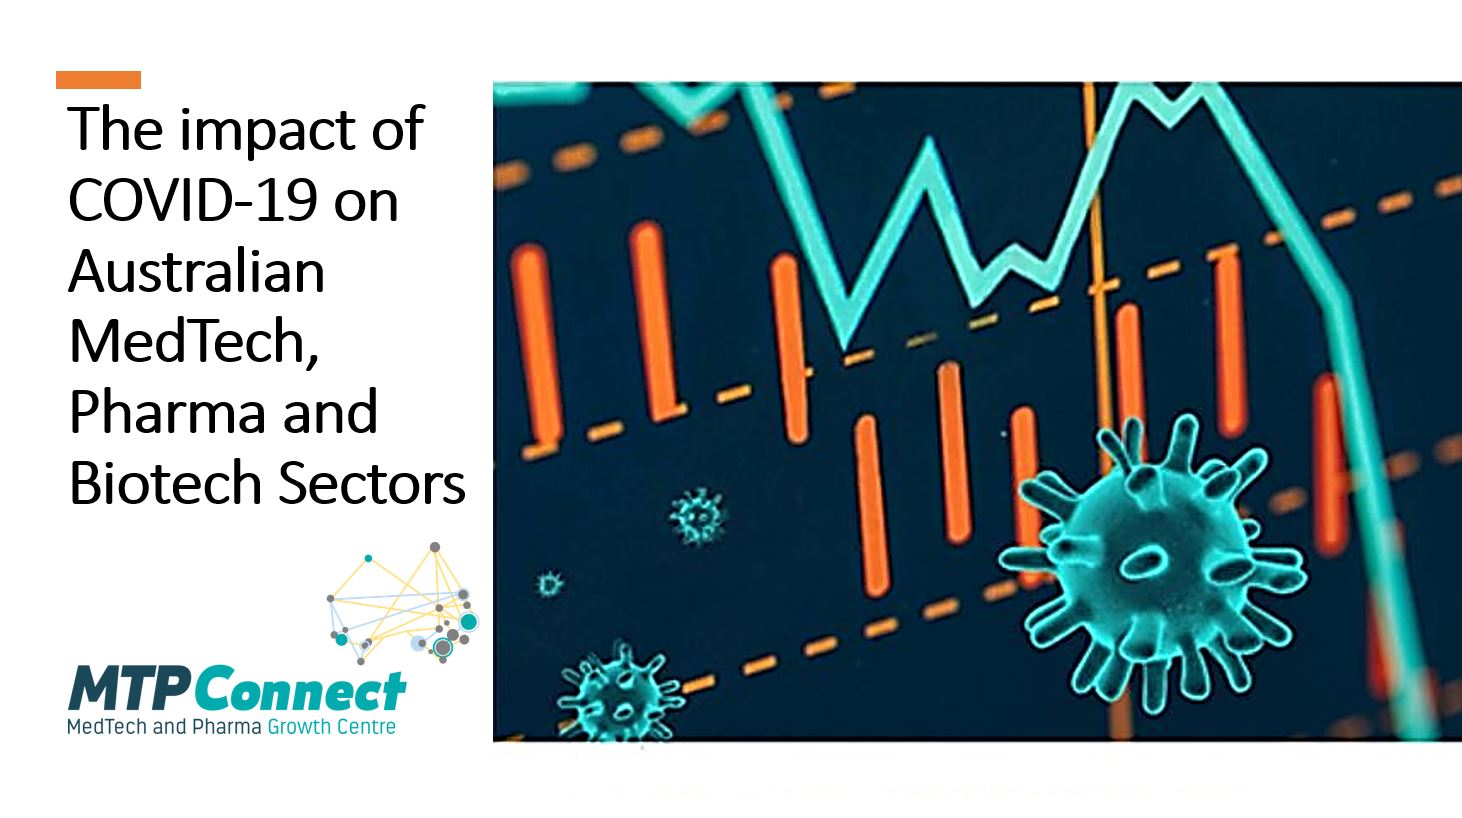 Market Research Report Pharma MedTech Biotech - Australia’s MedTech, Pharma and Biotech sectors hit hard by COVID-19 but play critical role in pandemic response and research: New Report